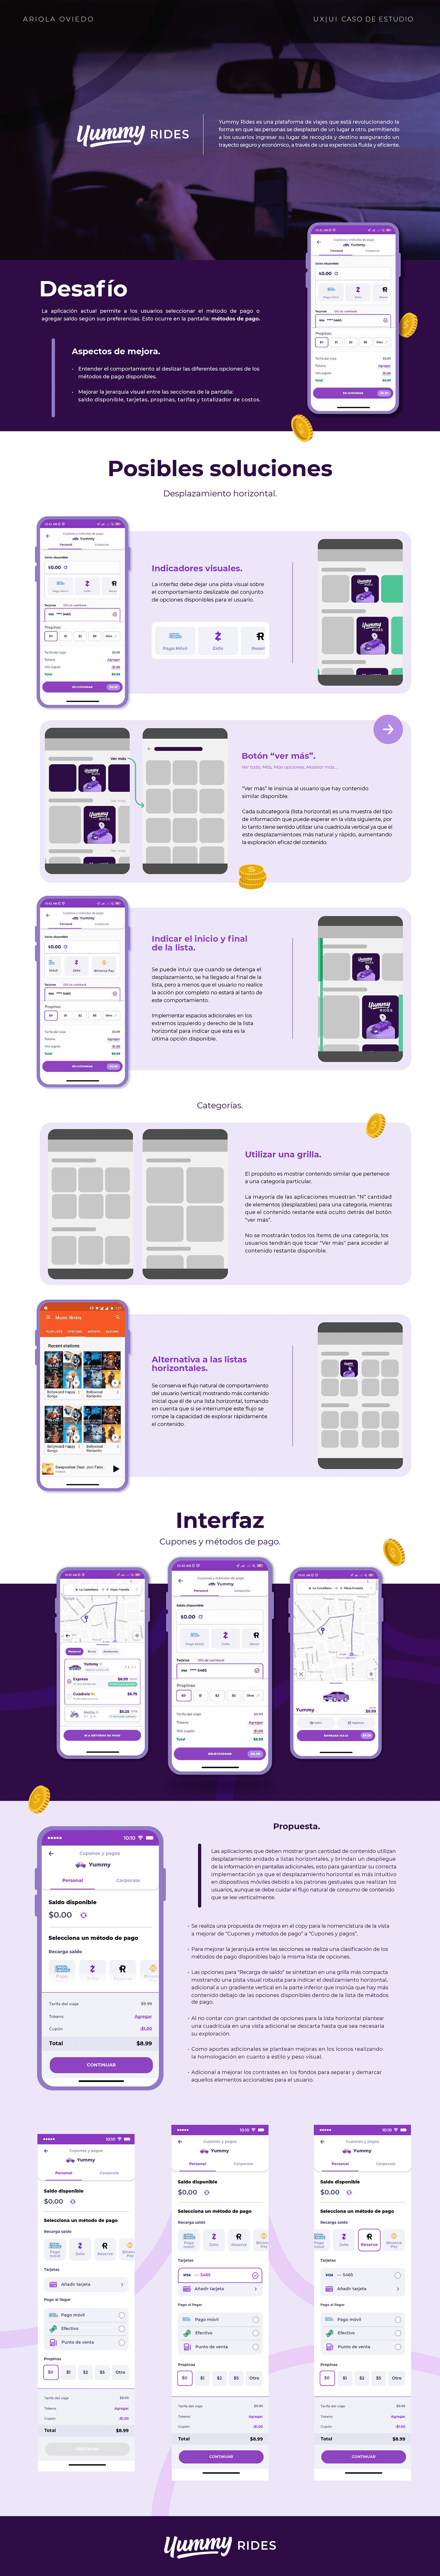 ux UI design Case Study user interface Experience